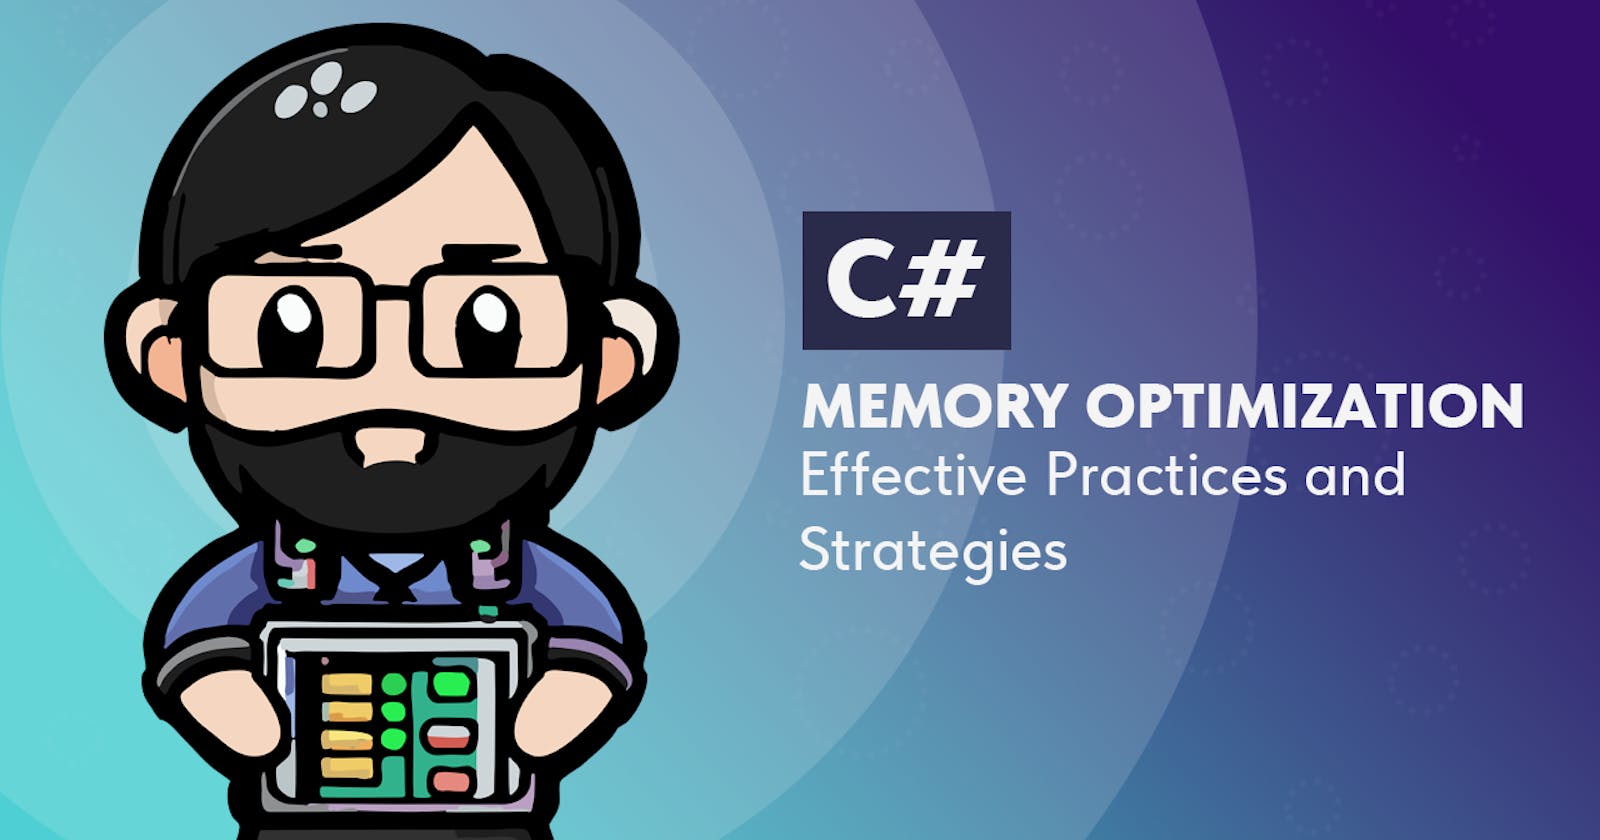 Memory Optimization in C#: Effective Practices and Strategies